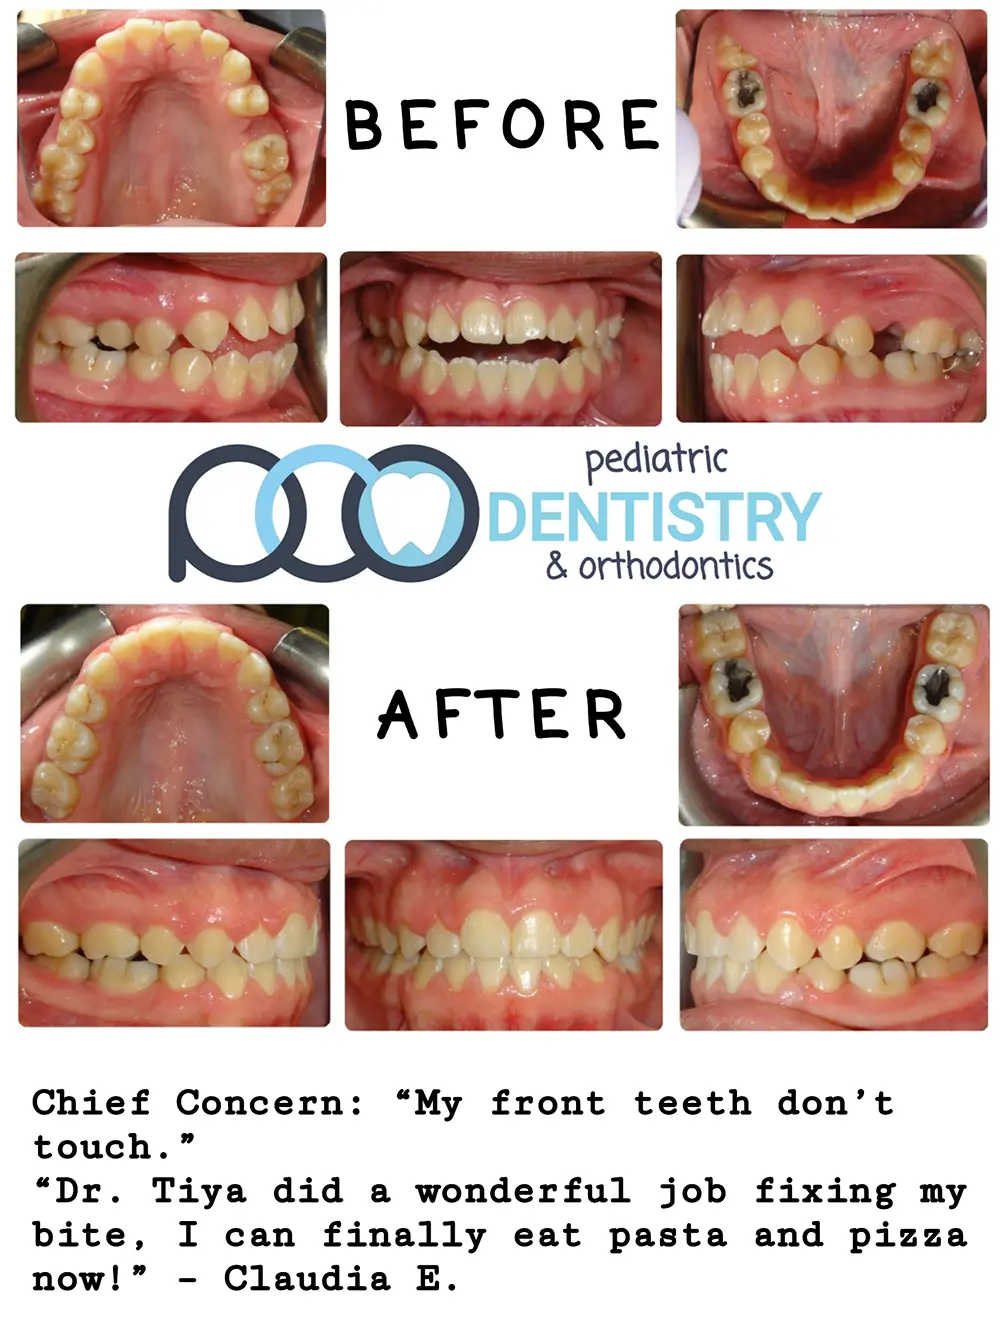 Before and After Teeth Treatment